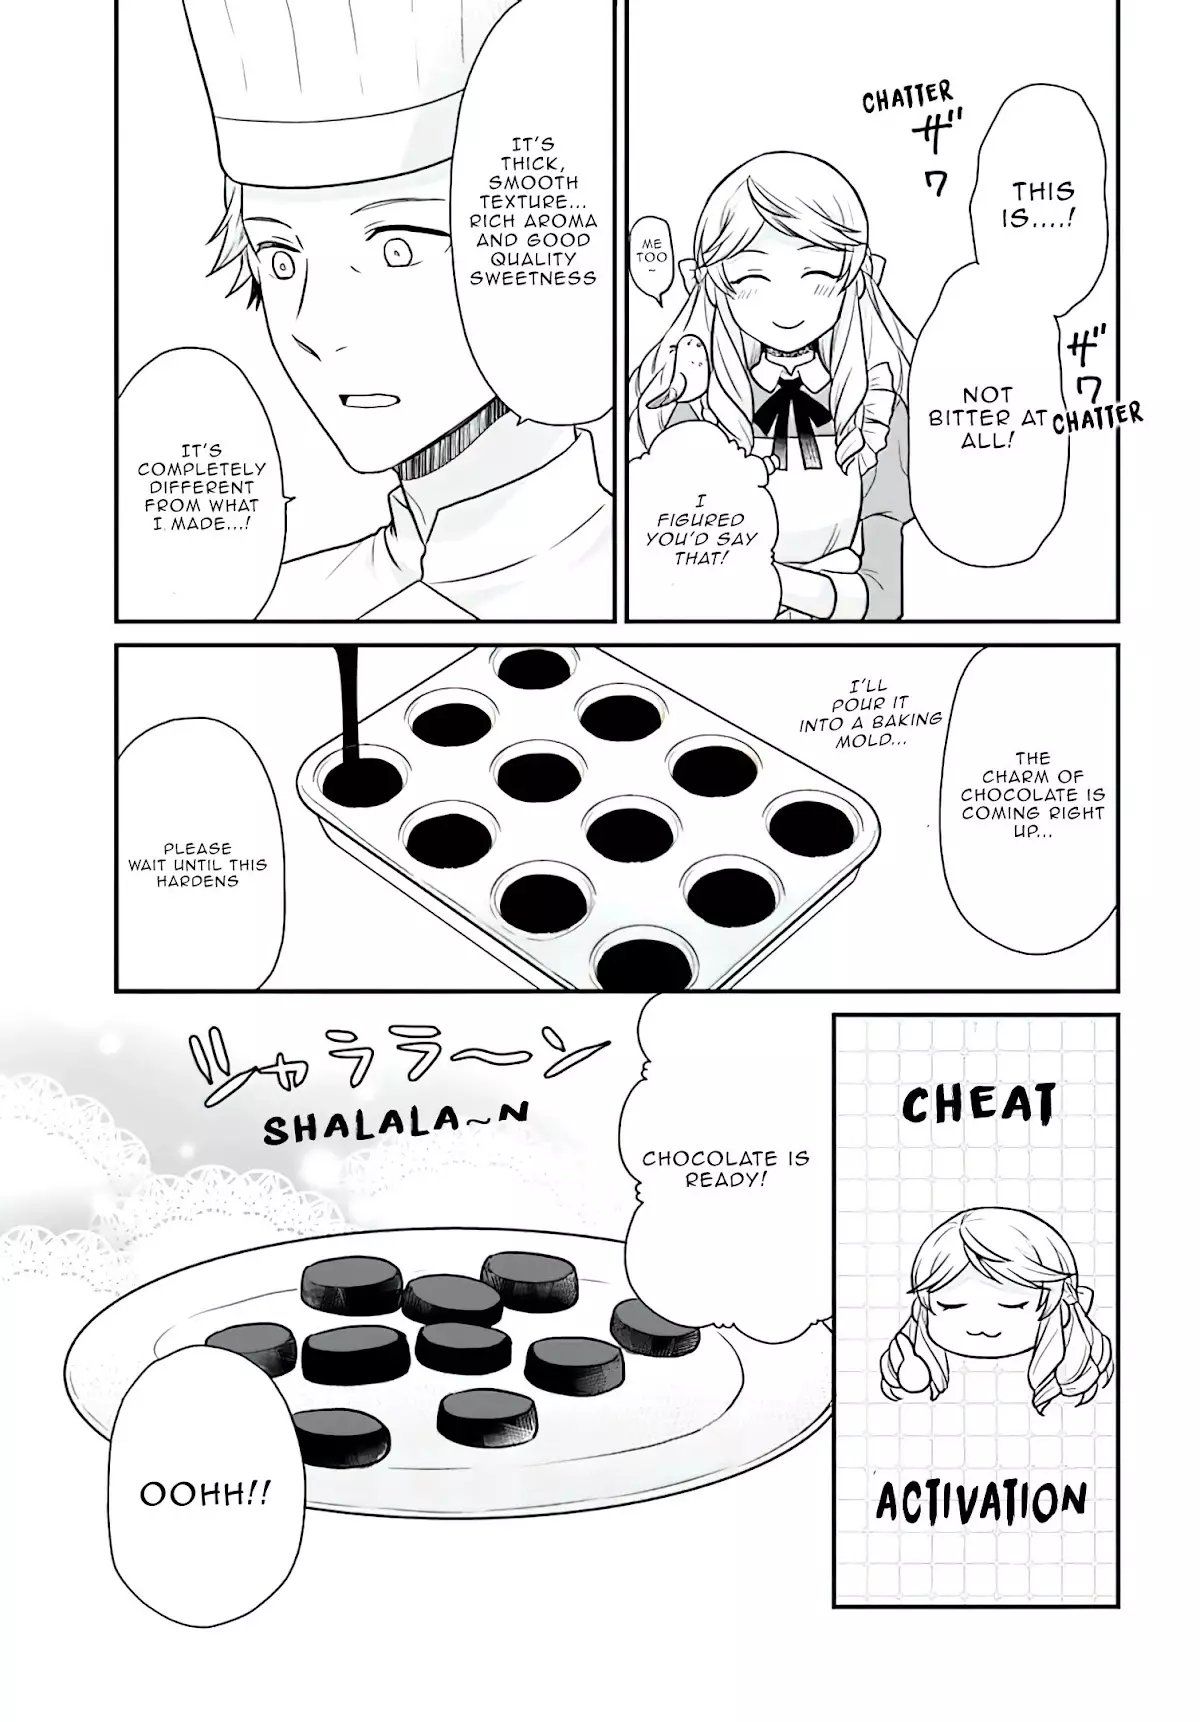 As A Result Of Breaking An Otome Game, The Villainess Young Lady Becomes A Cheat! - 19 page 14-1907f03c